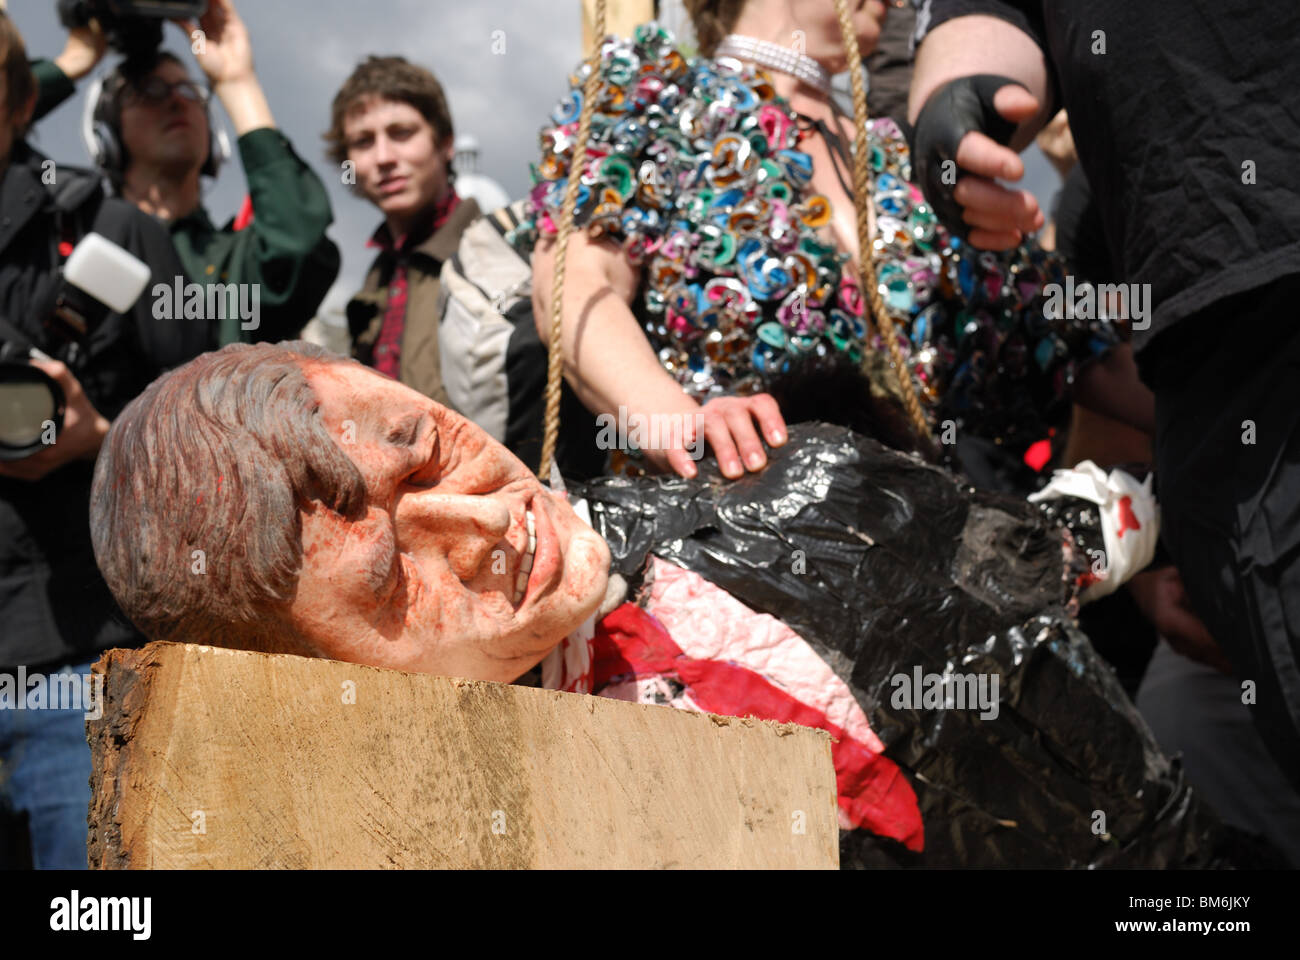 The effigy of Gordon Brown is beheaded in Parliament Square on May Day. Stock Photo